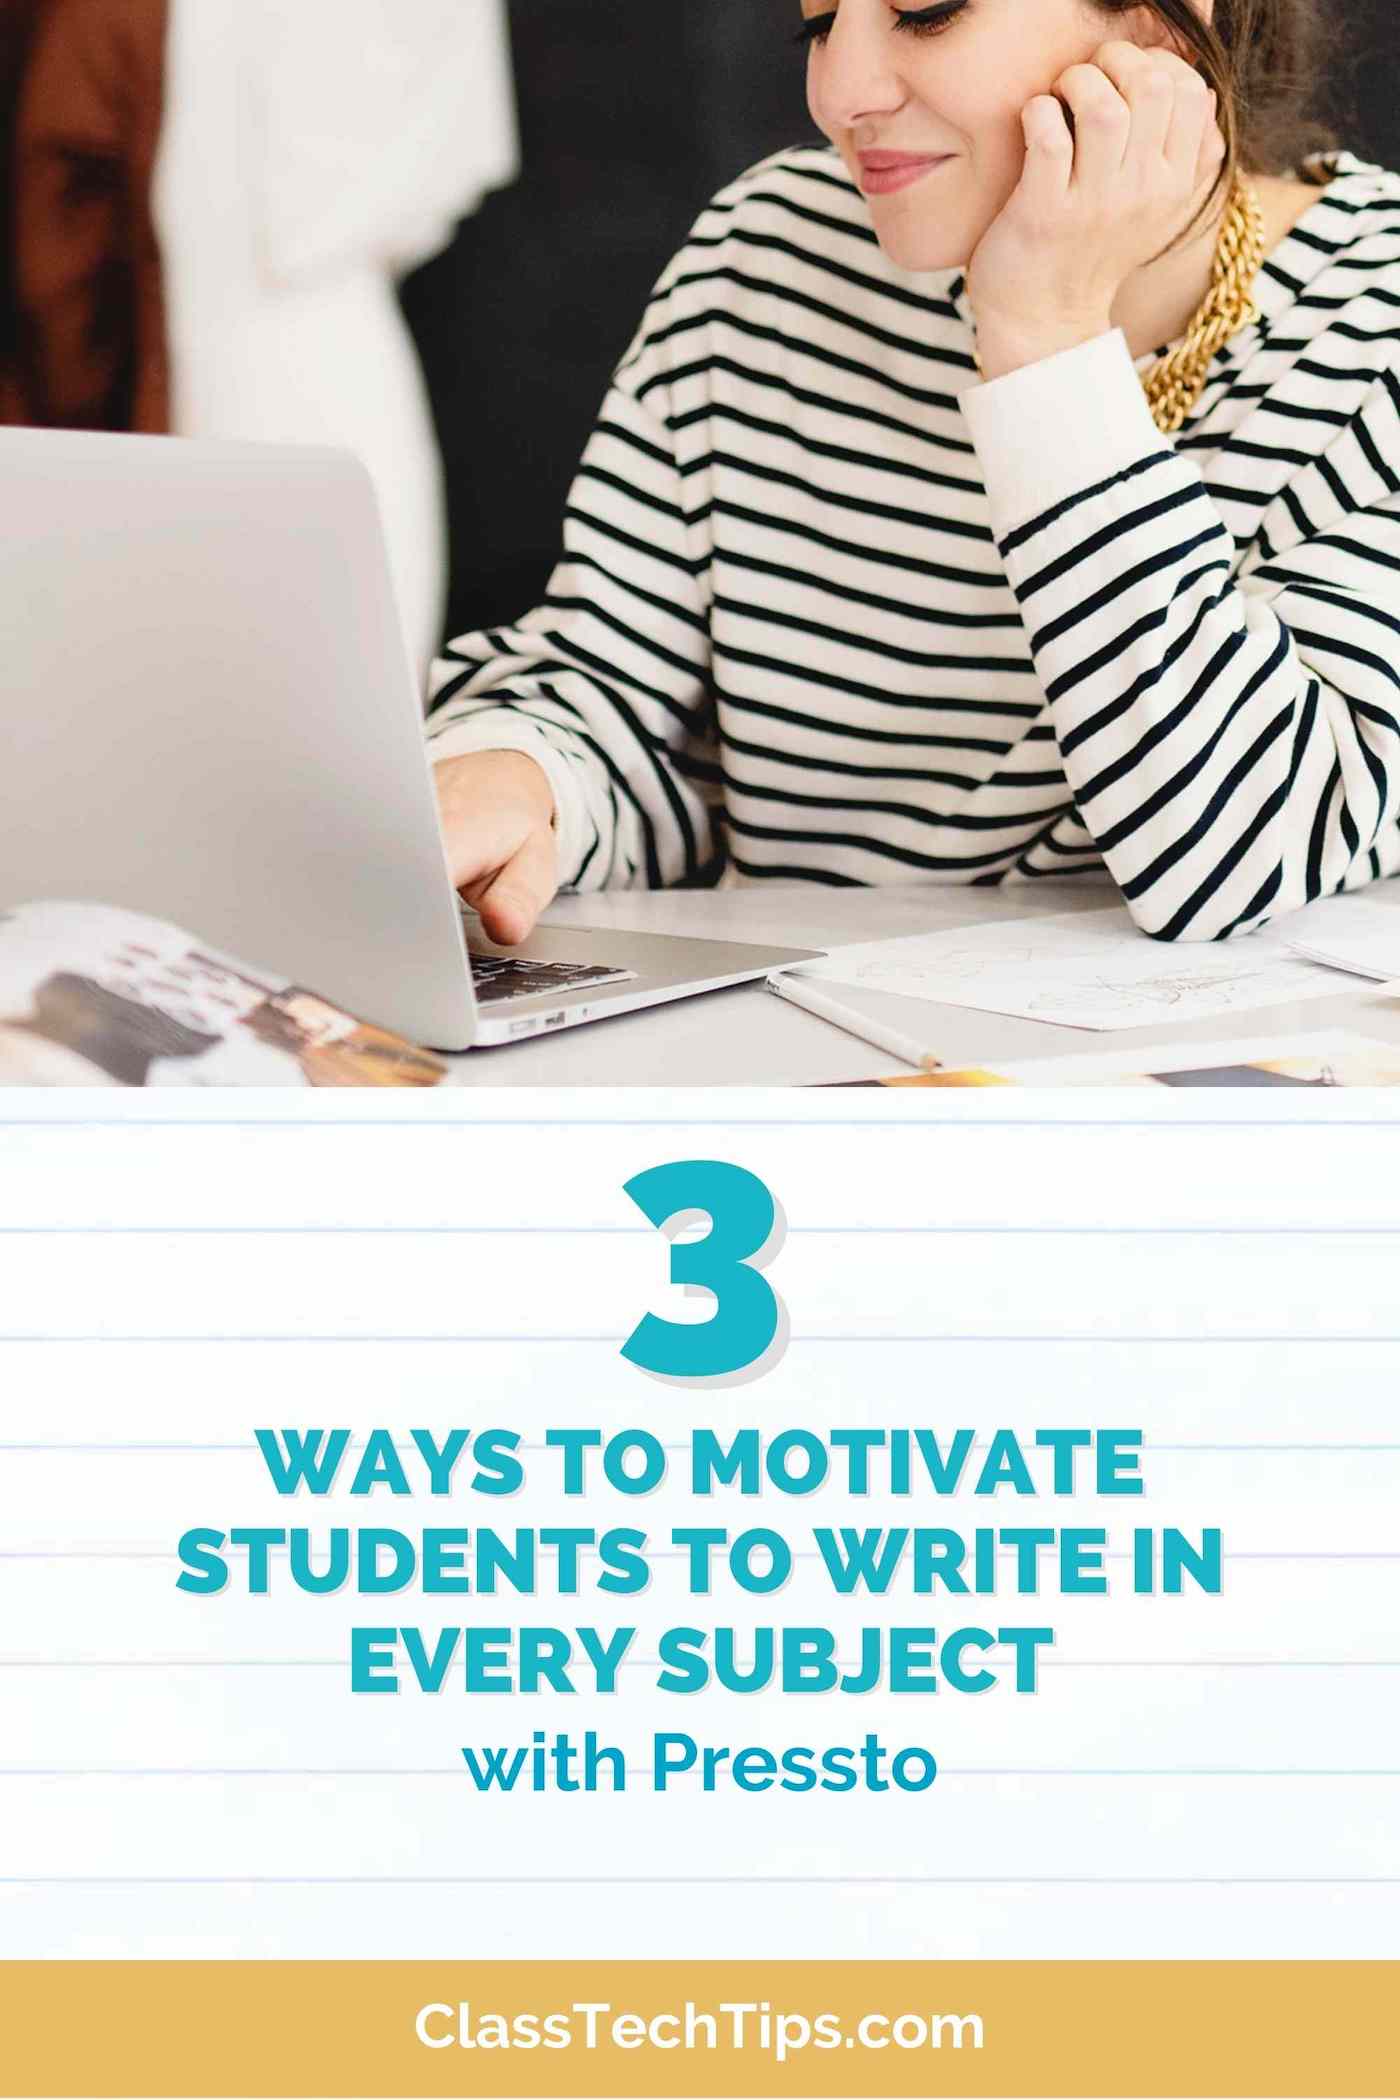 Motivate-Students-to-Write-in-Every-Subject